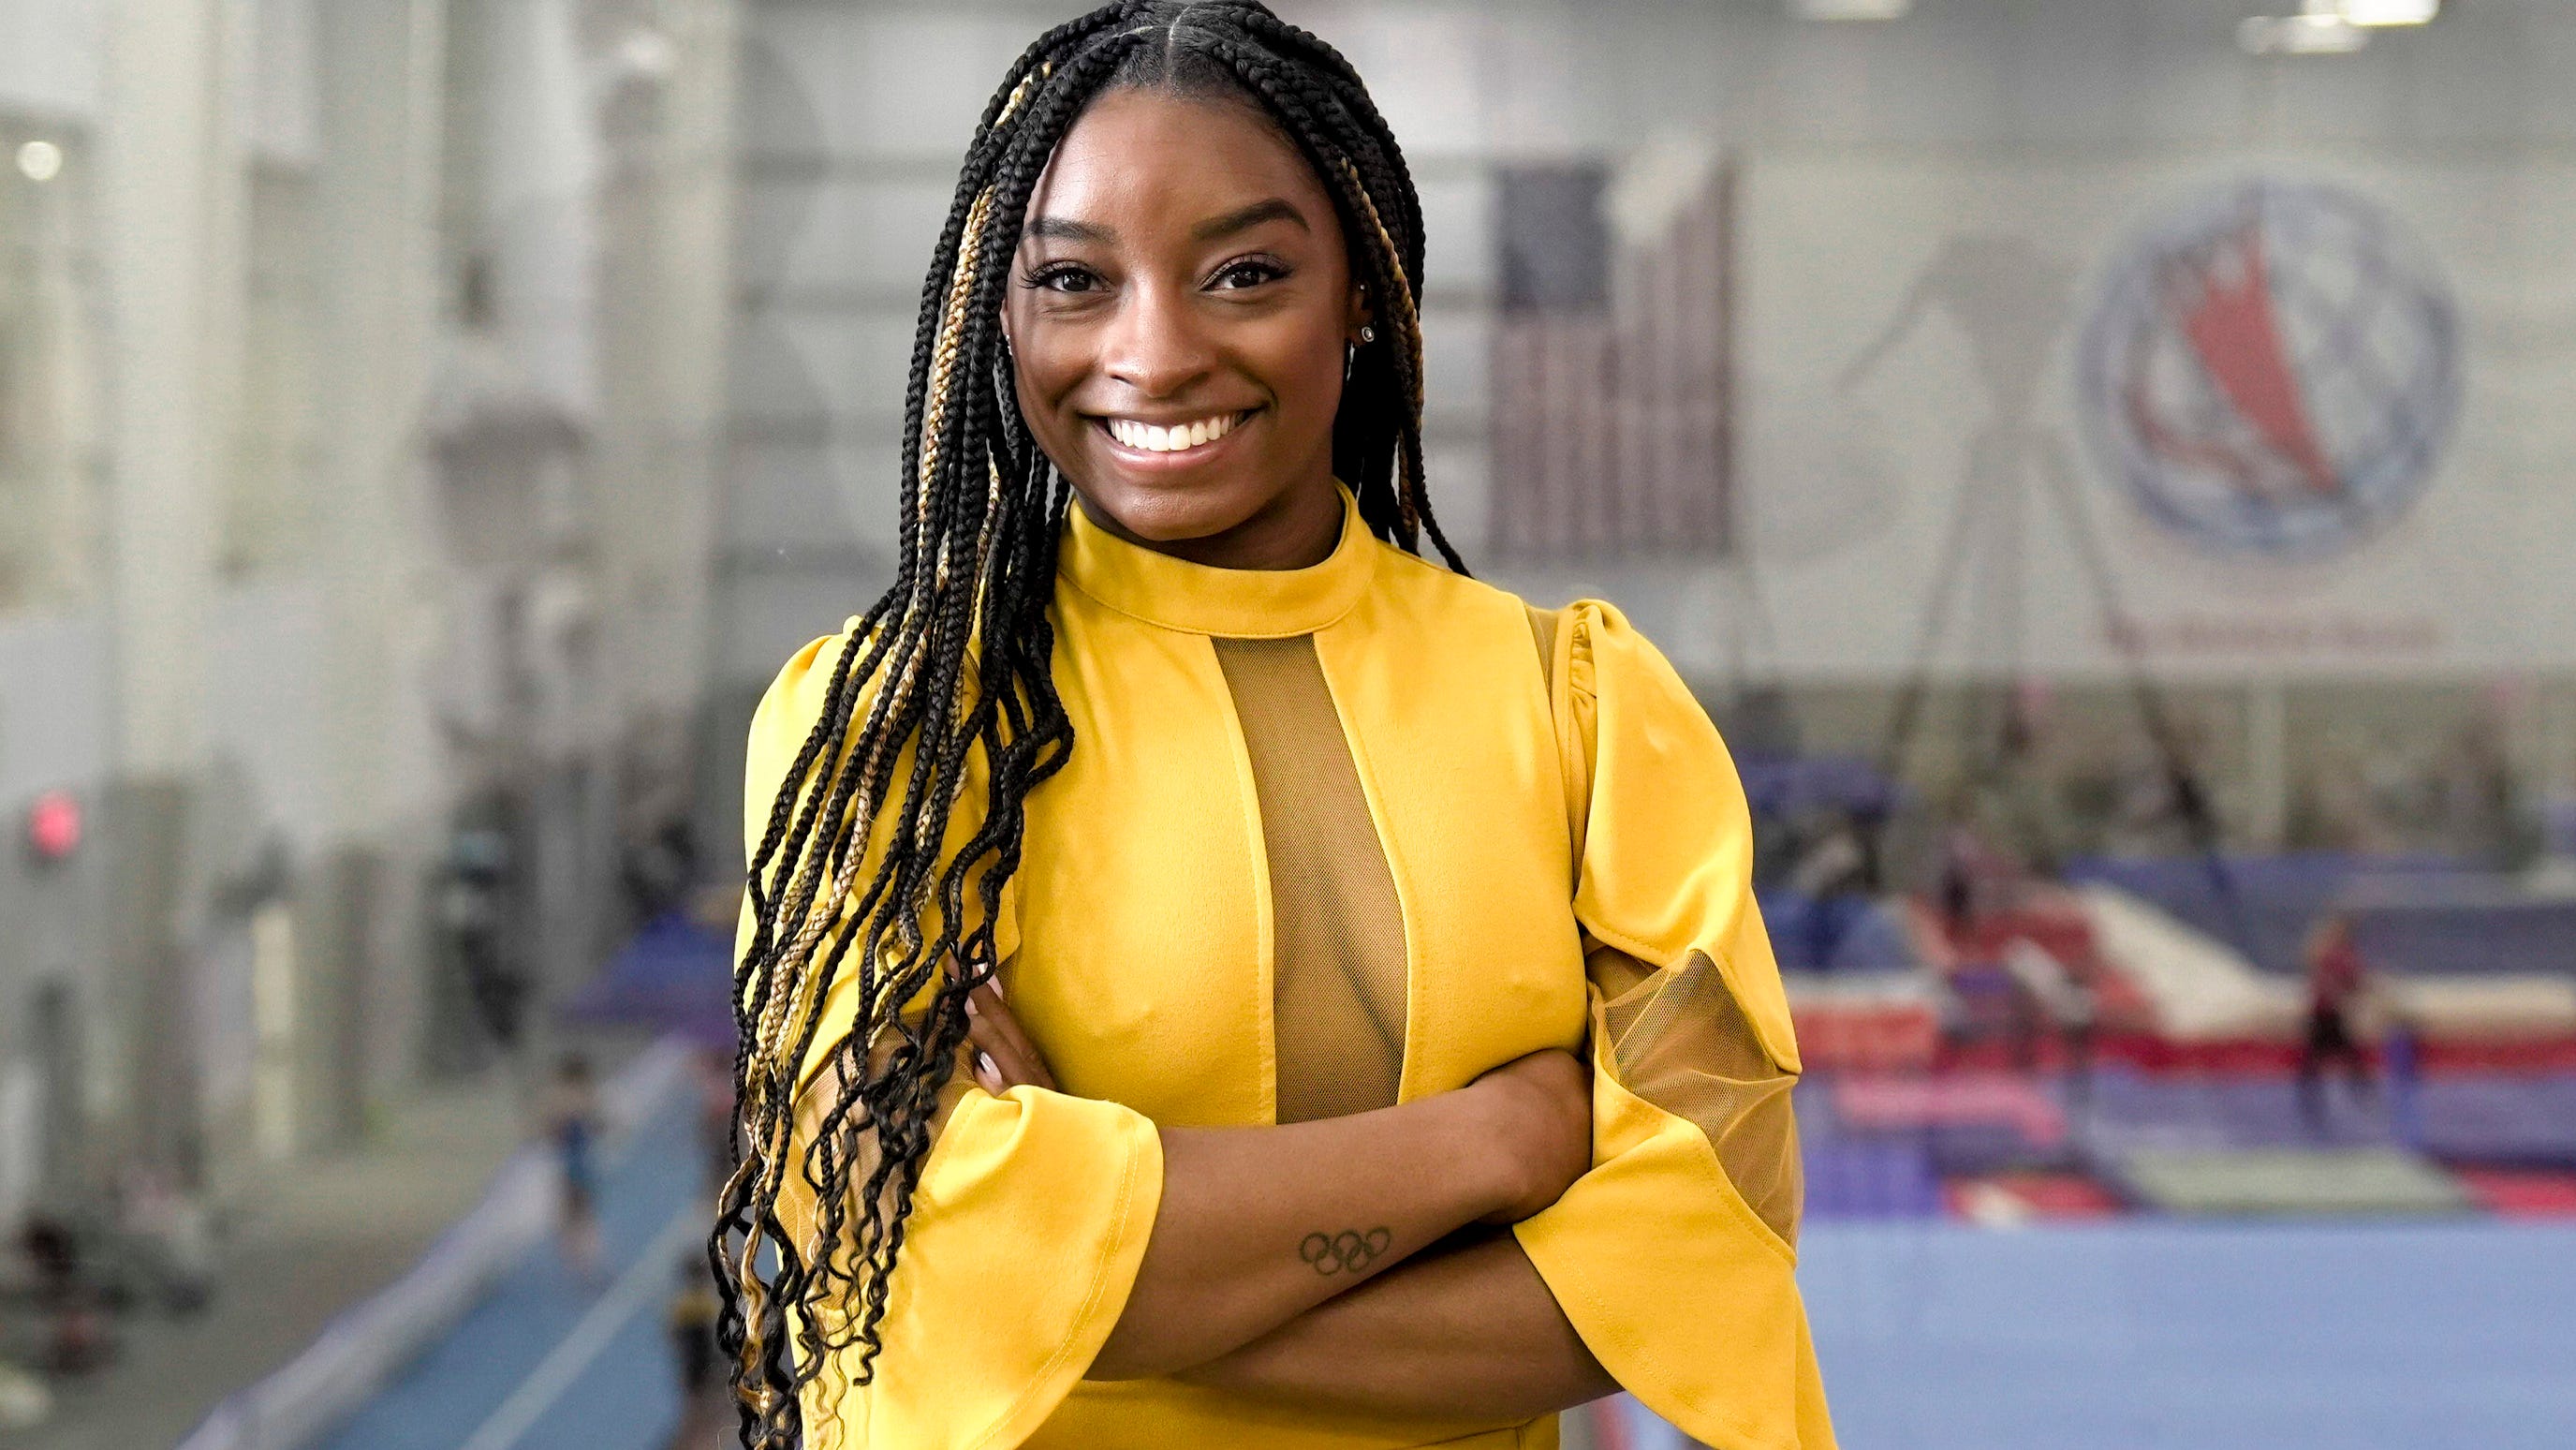 simone-biles-my-life-could-have-been-very-different-that-s-why-i-m-a-voice-for-others